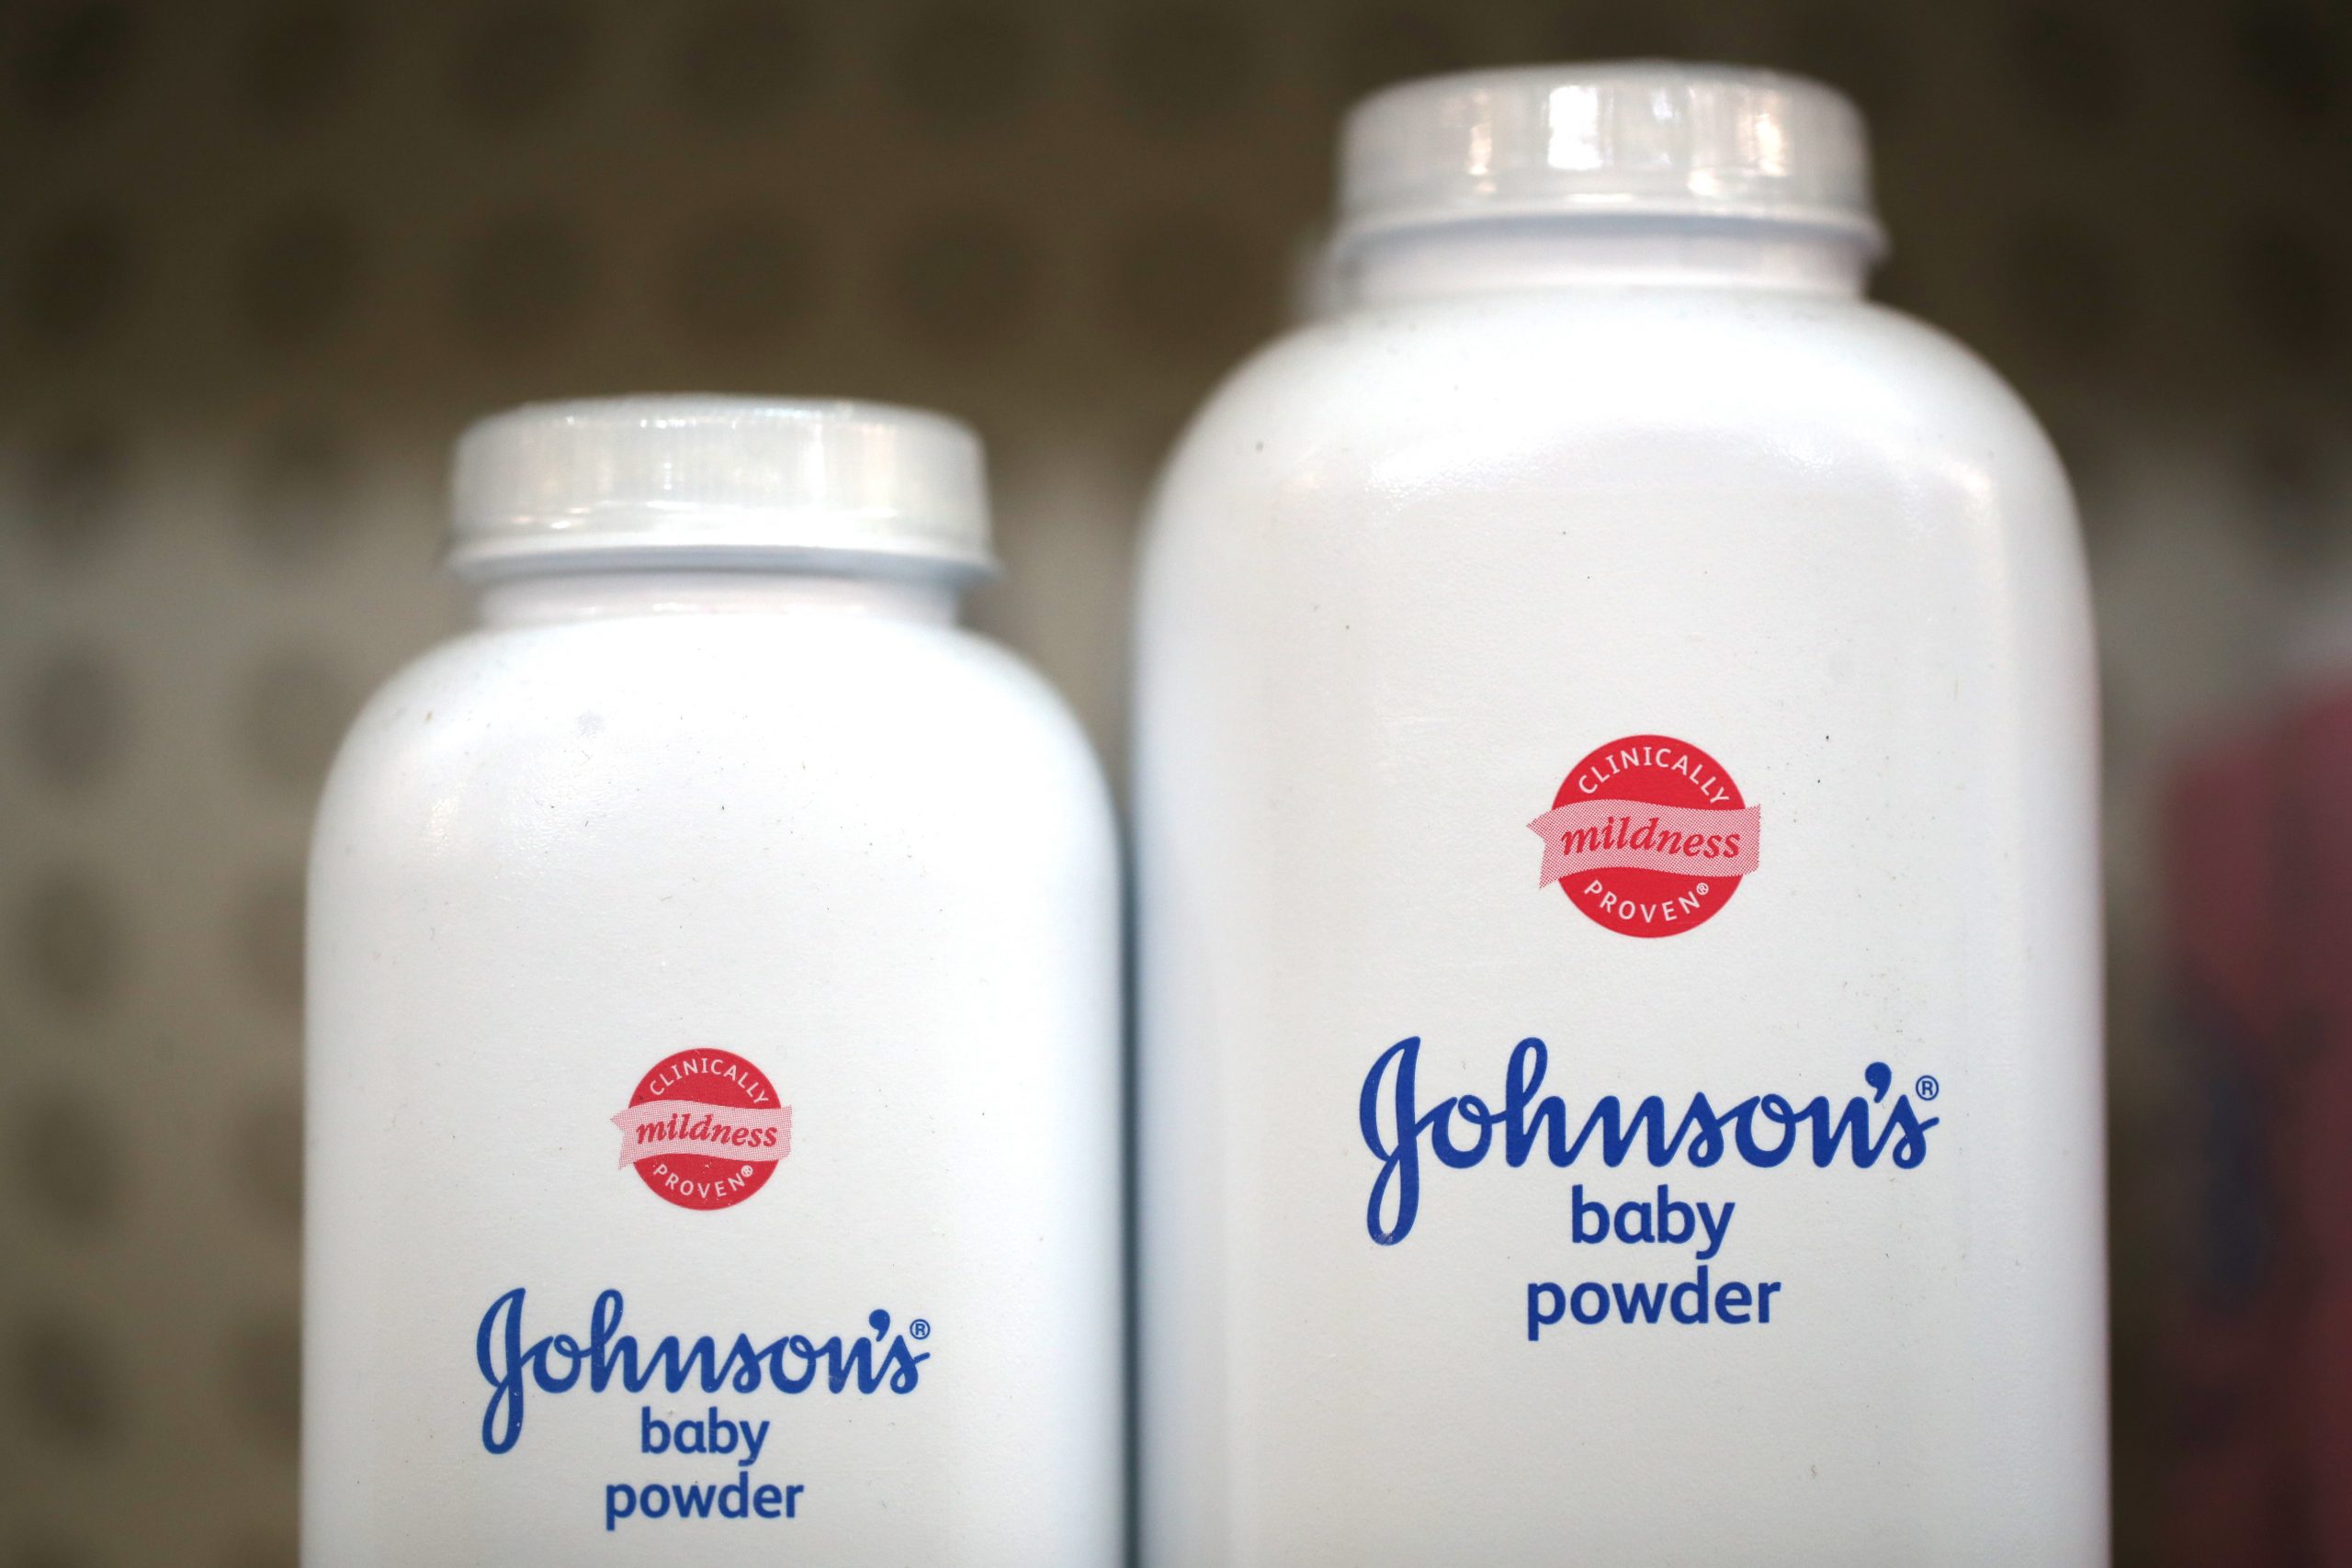 Johnson & Johnson Fine sale of talc products in the US